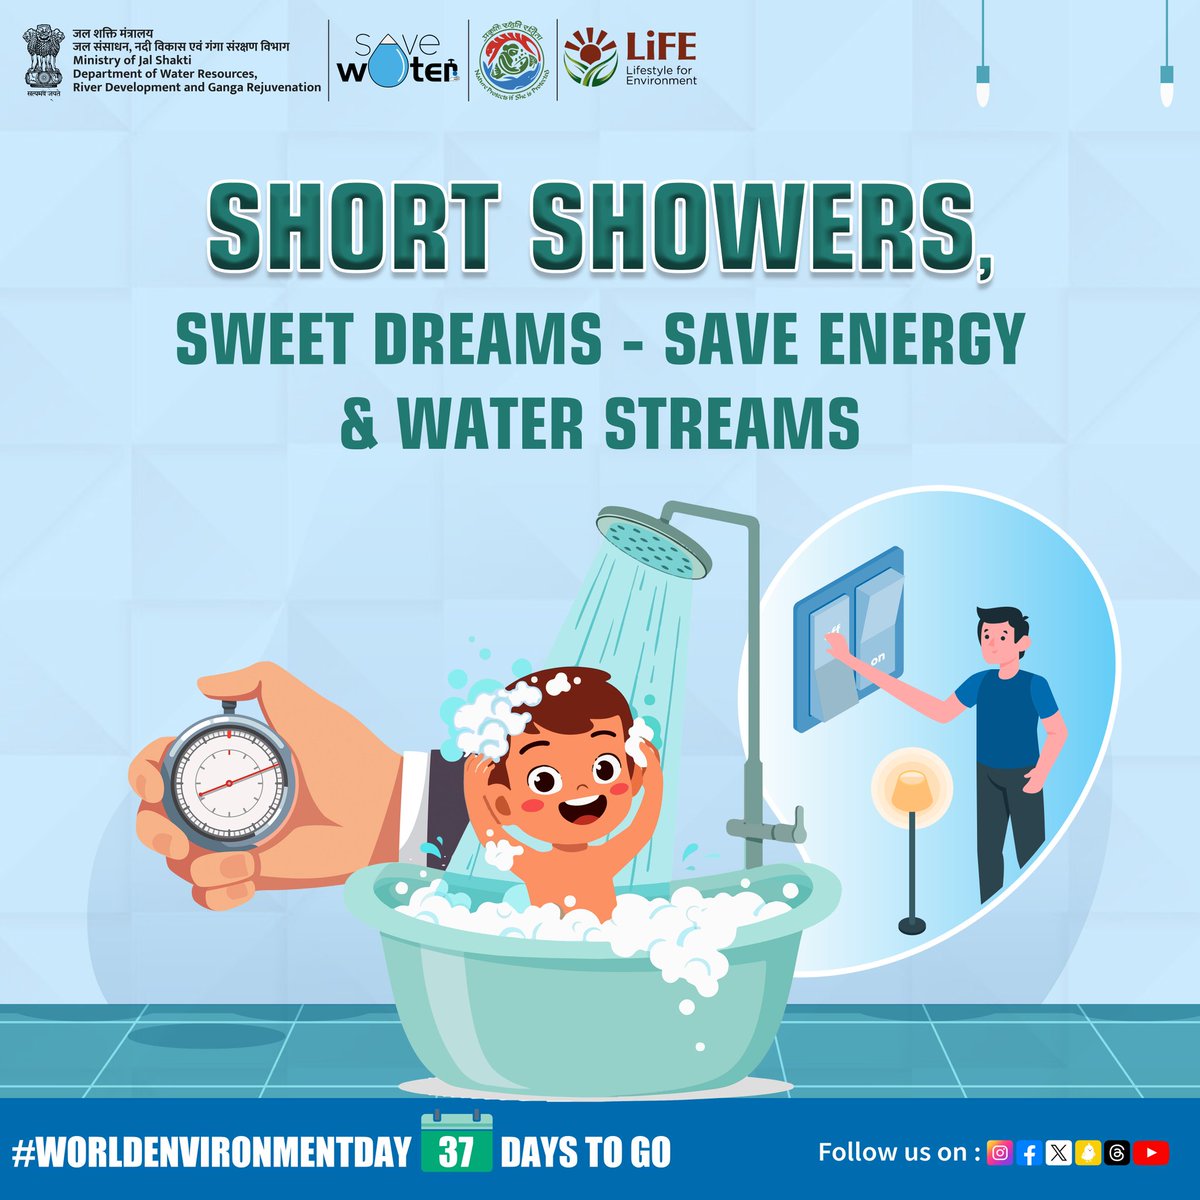 Shower Power! How much difference can you make in 5 minutes? Every minute counts when it comes to saving water and energy. Shortening your shower by just 5 minutes can make a big impact. 

Join #MissionLiFE and let's make a difference together! #ProPlanetPeople #WED